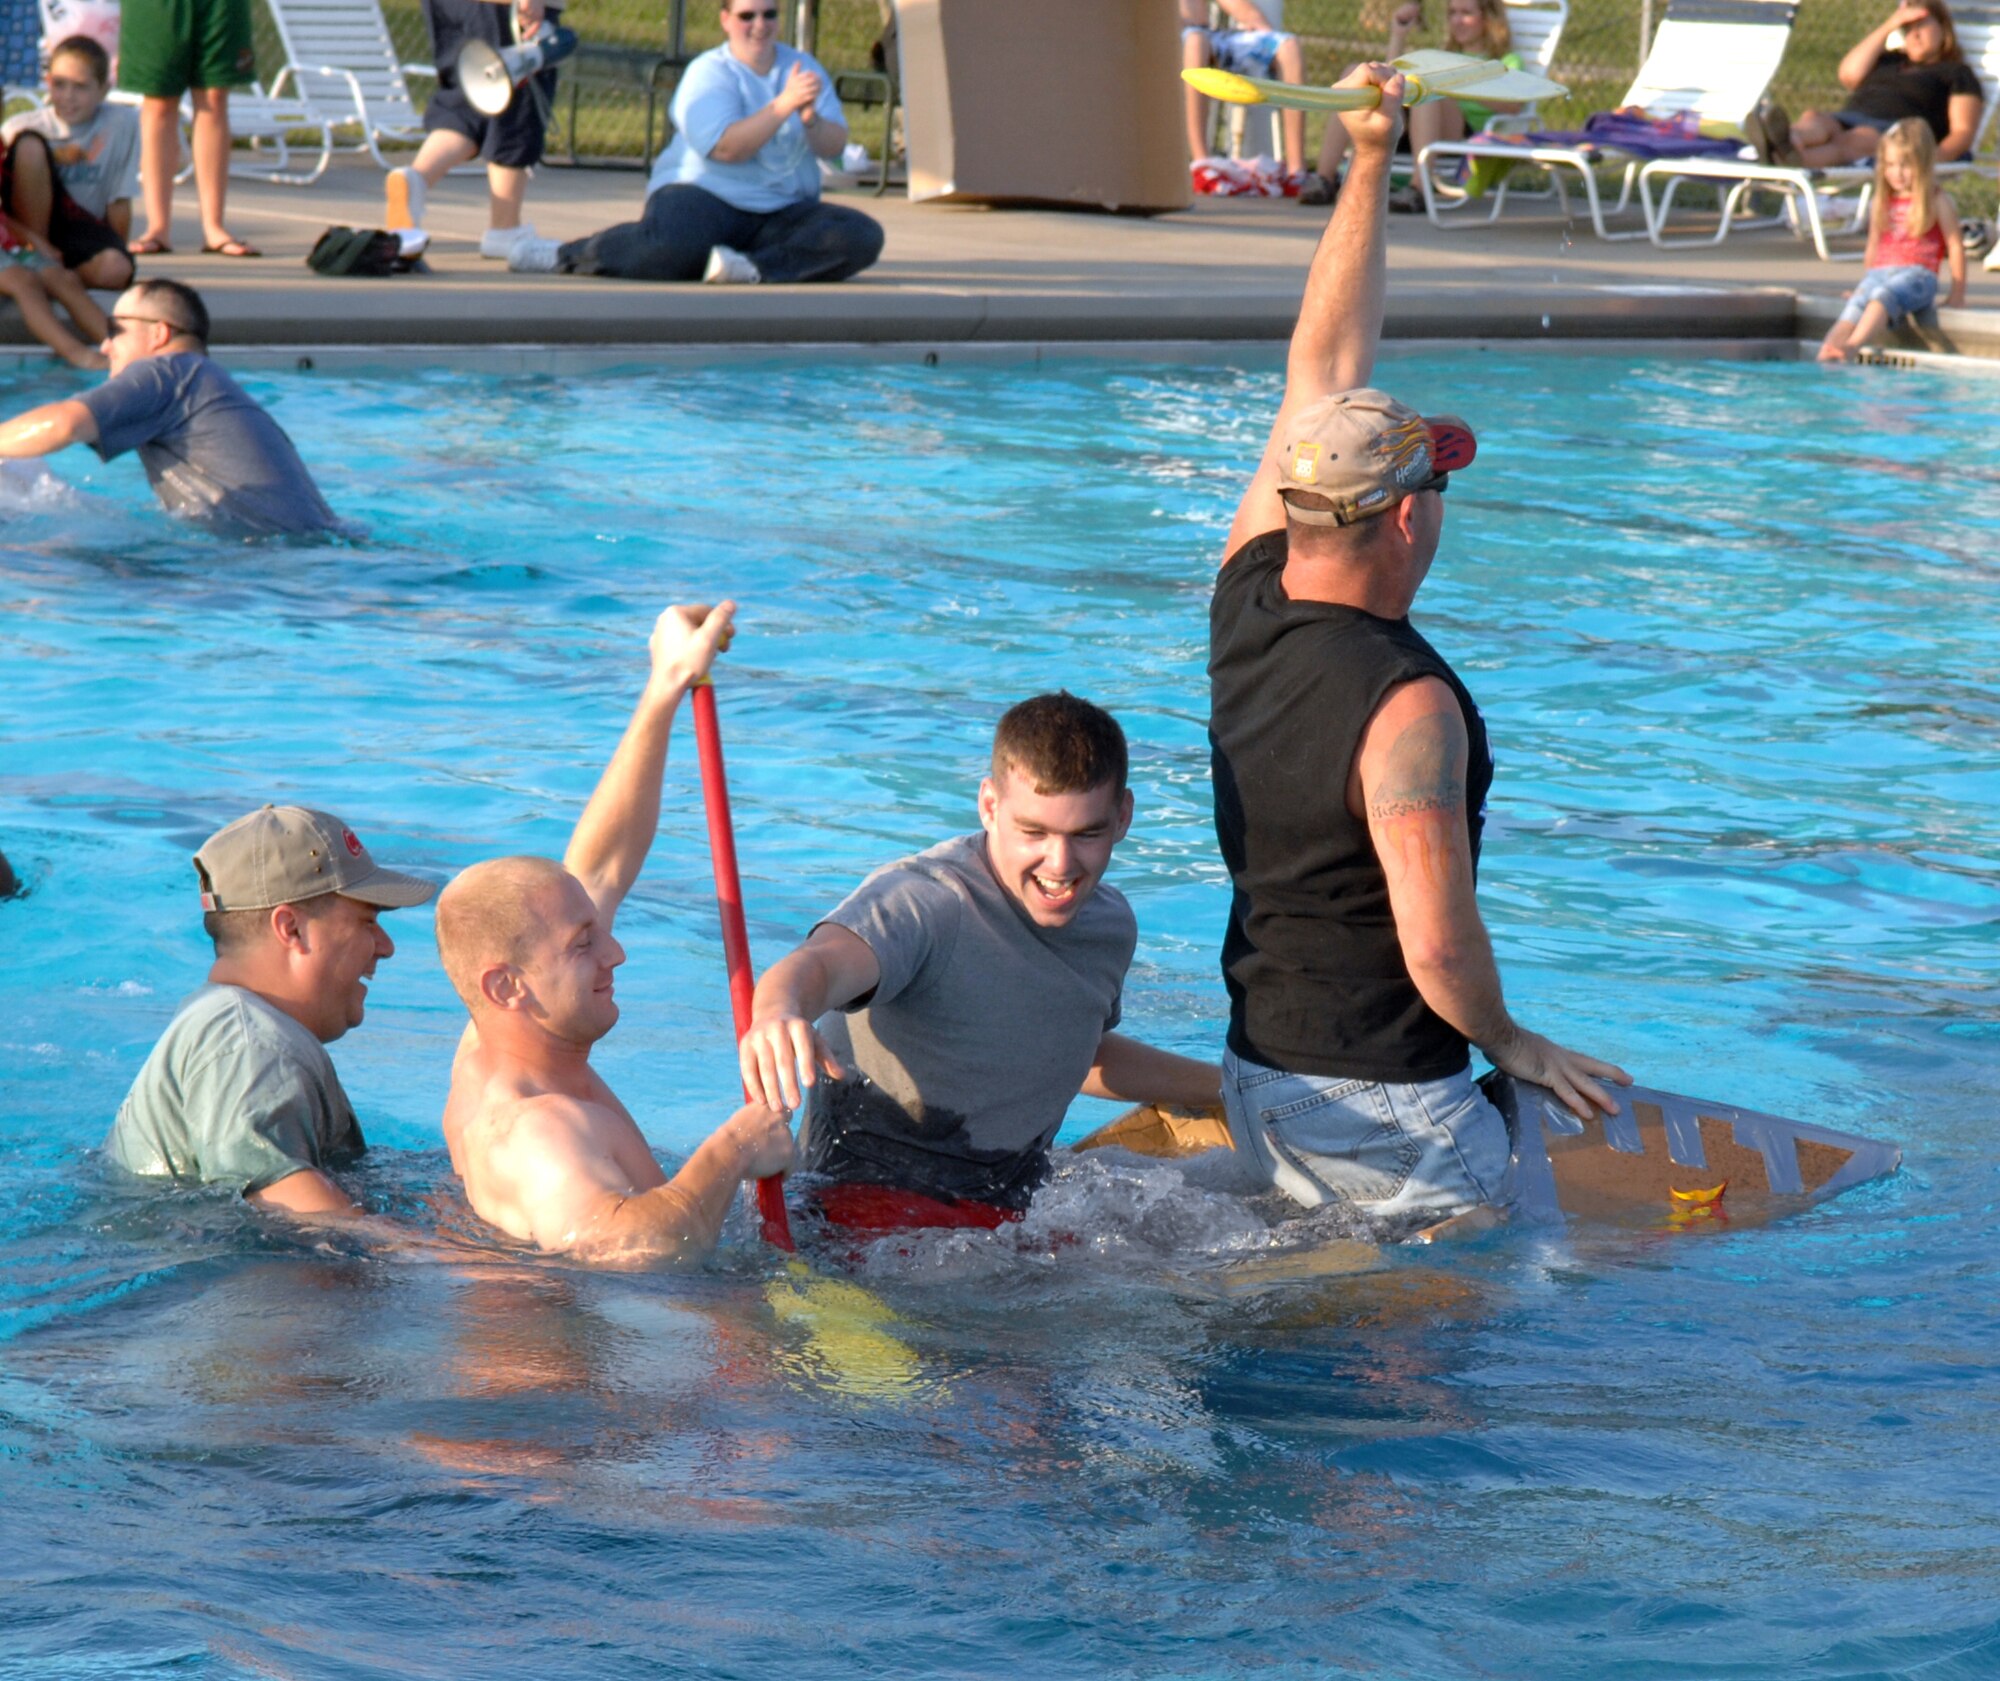 WHITEMAN AIR FORCE BASE, Mo. -- The crew of the S.S. Minnom go down with their cardboard ship during the “best sinking” portion of the Build-a-Boat contest at the base pool July 20. The base pool is open Tuesday through Friday from 1:15 to 6:00 p.m. and Saturday and Sunday noon to 6 p.m. (U.S. Air Force photo/Airman 1st Class Stephen Linch)

